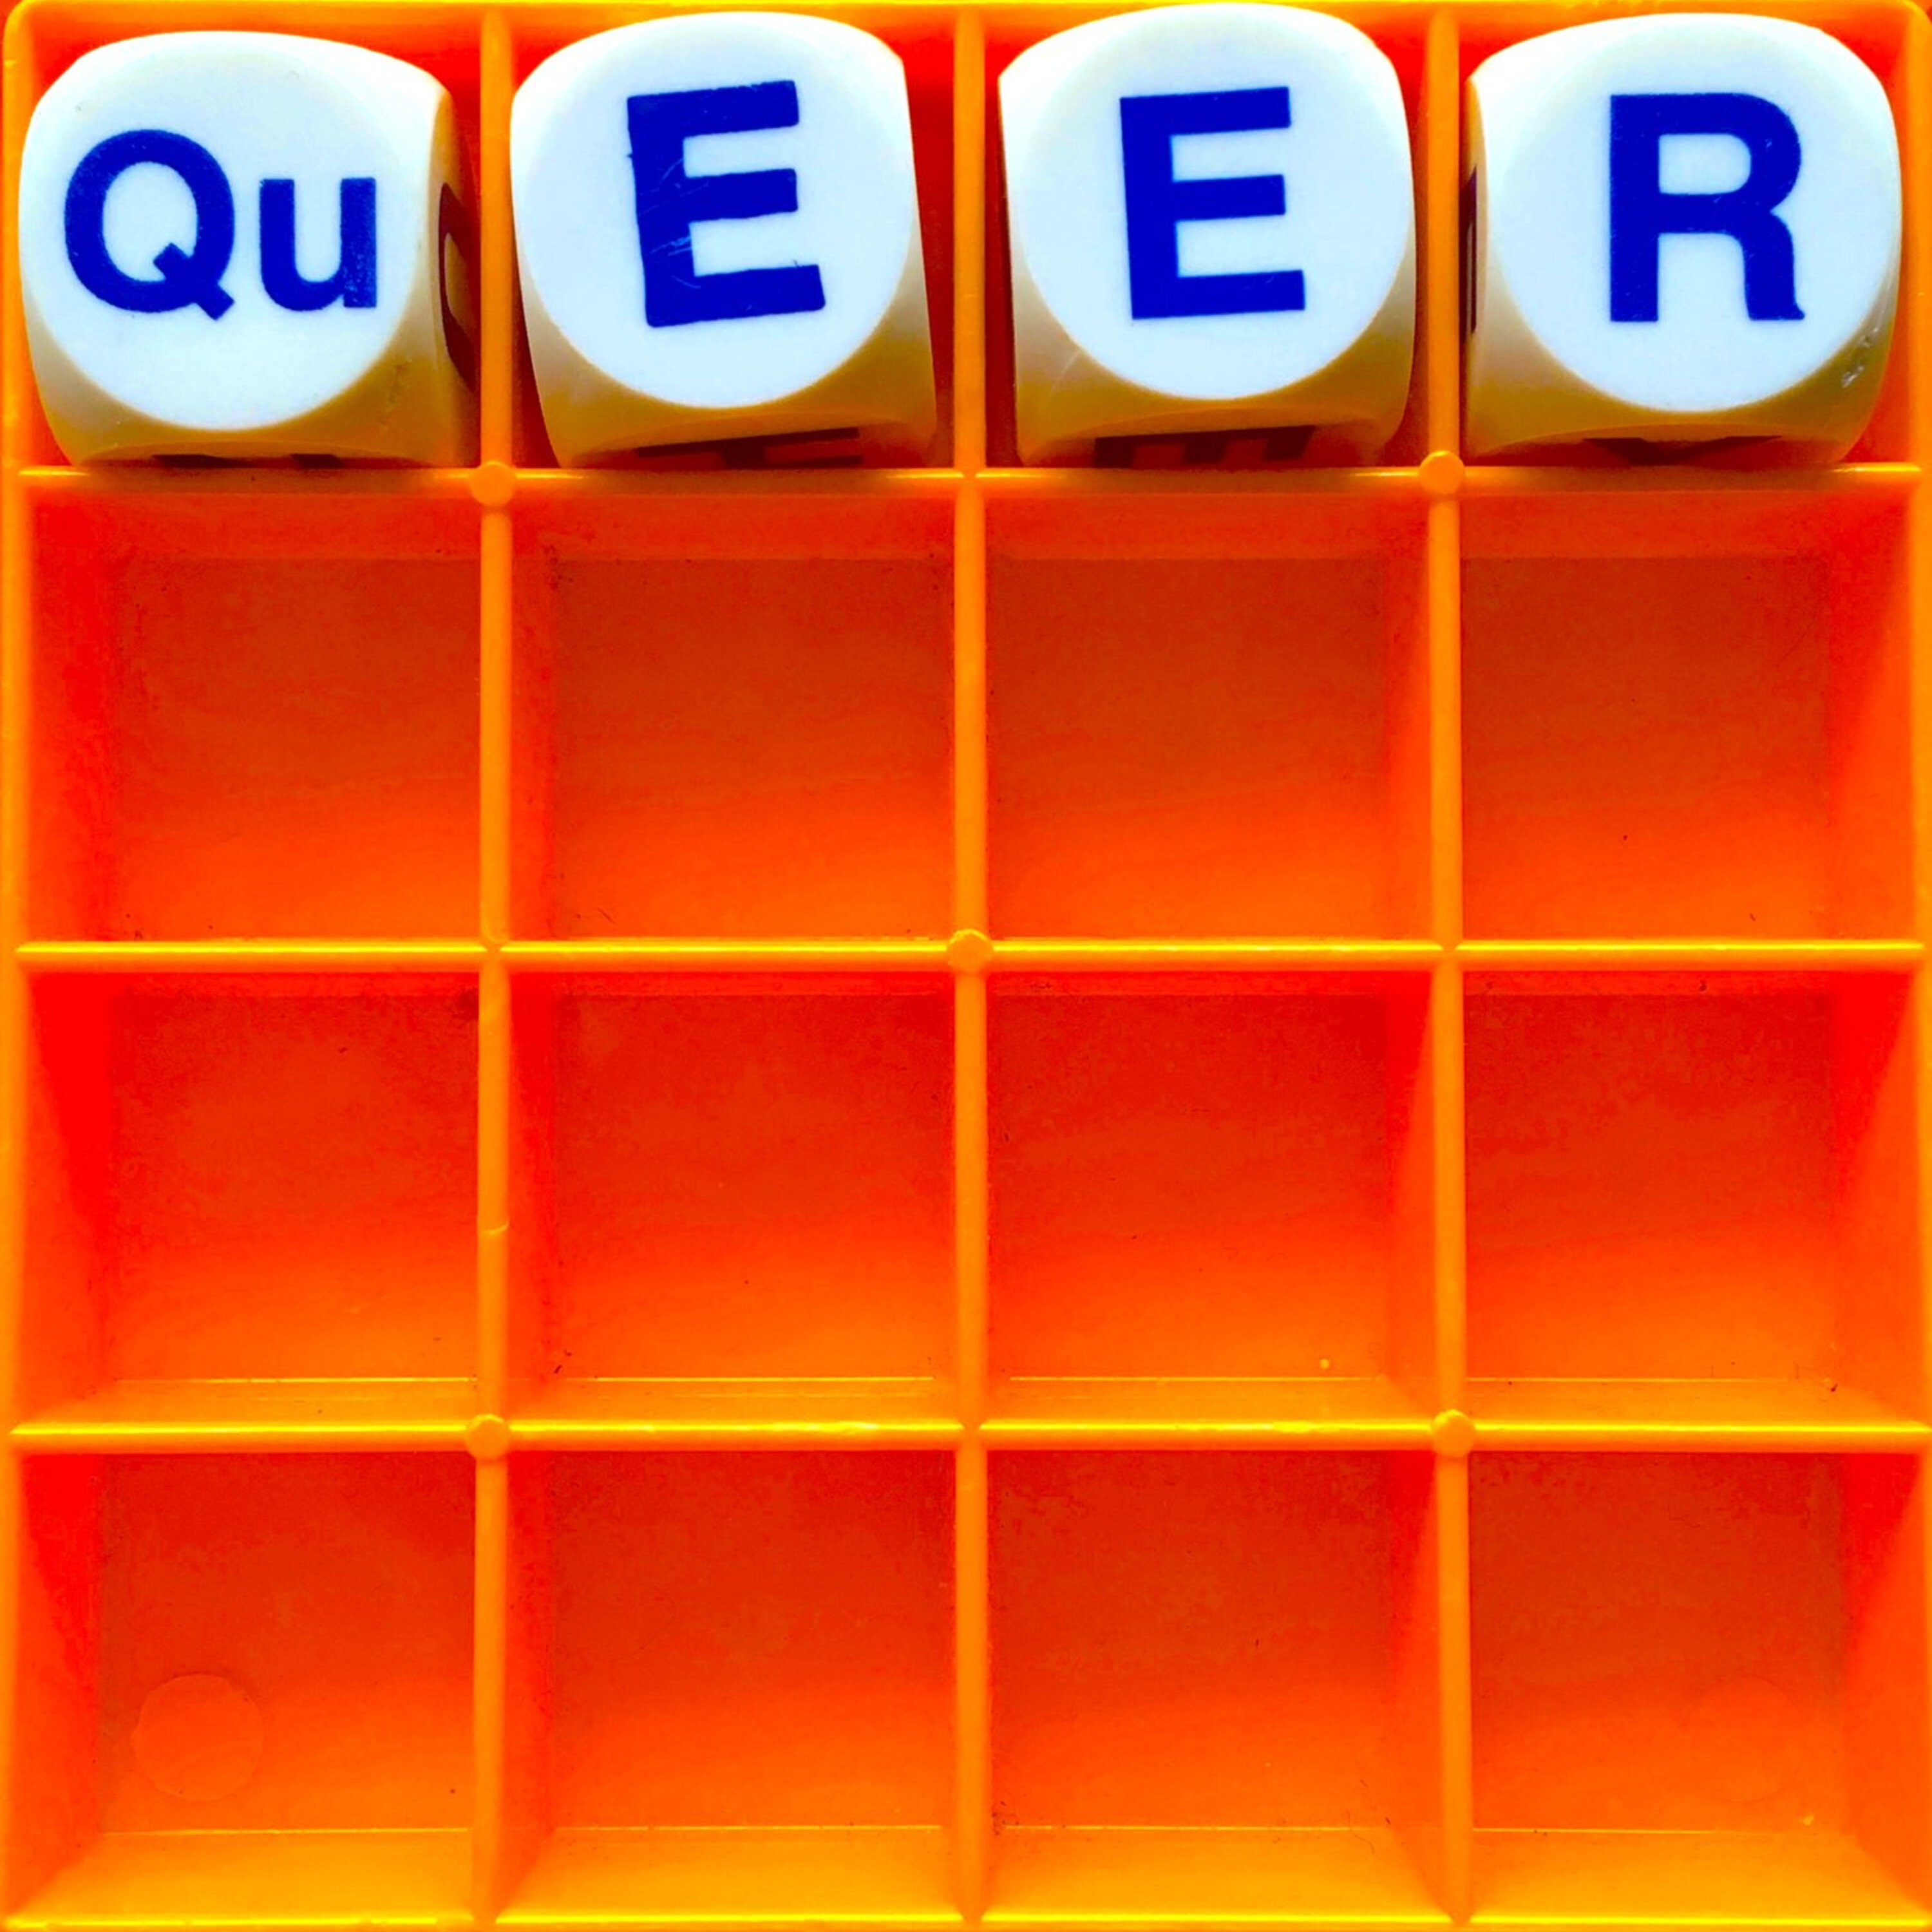 Thumbnail for "79. Queer".